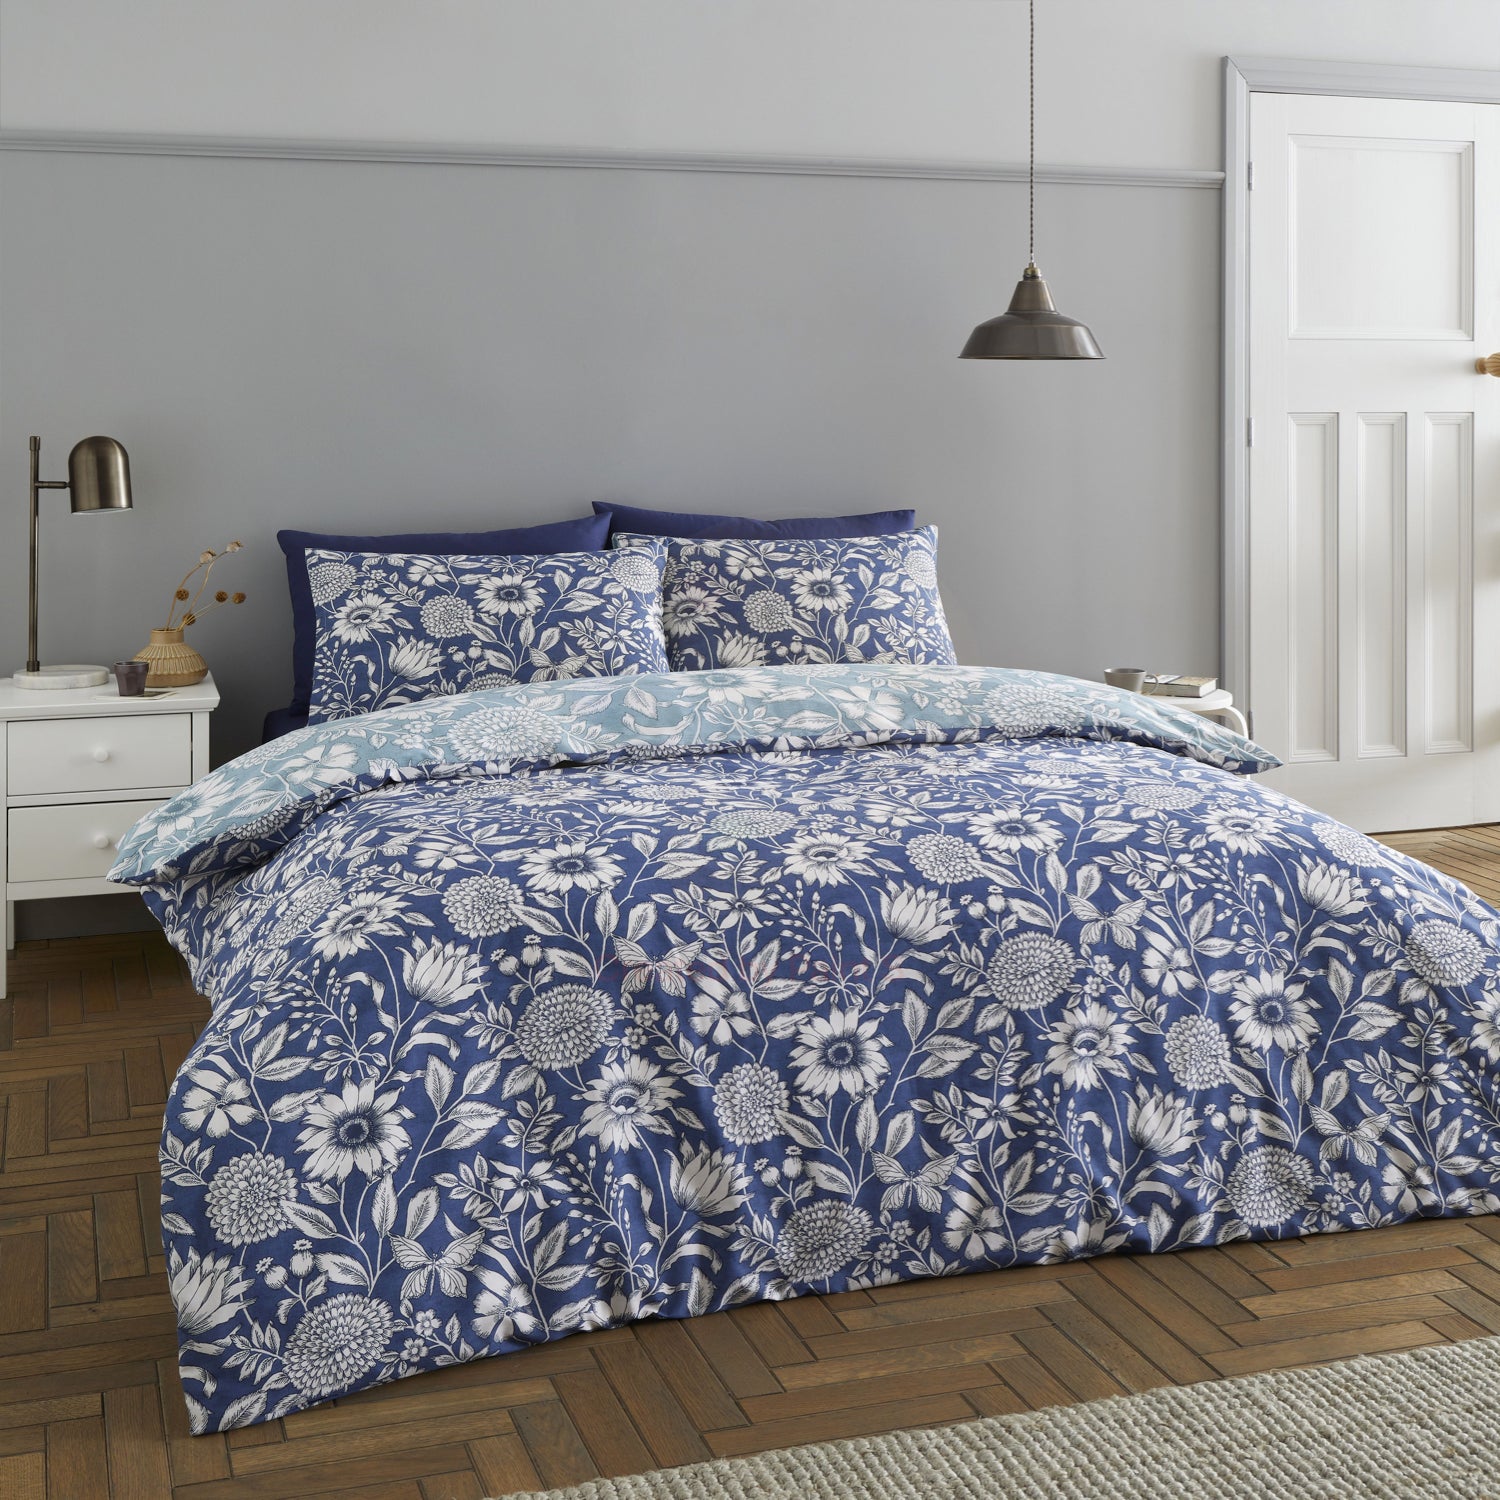 Tapestry Floral, Azul